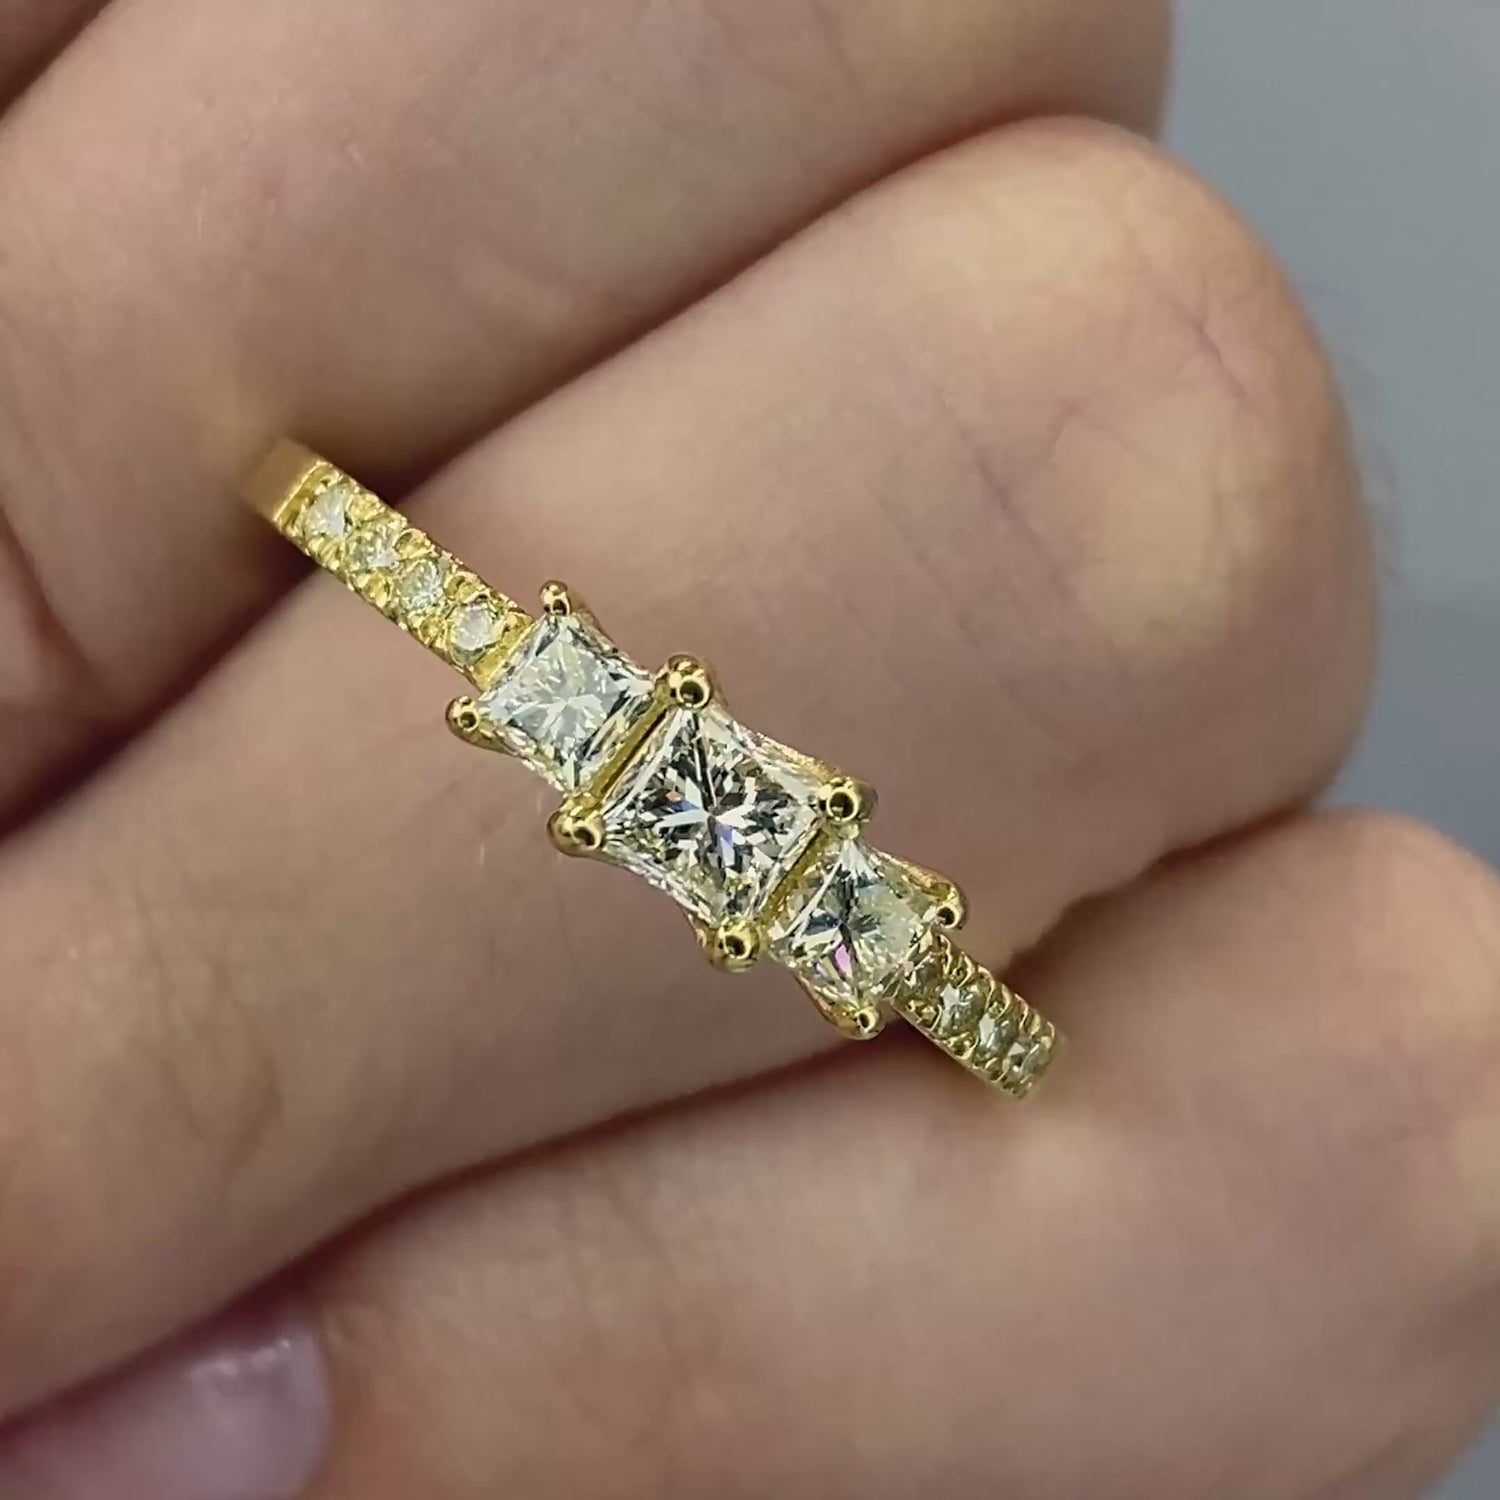 Fashionable 1.10 CT Princess and Round Cut Diamond Three Stone Ring in 18 KT Yellow Gold